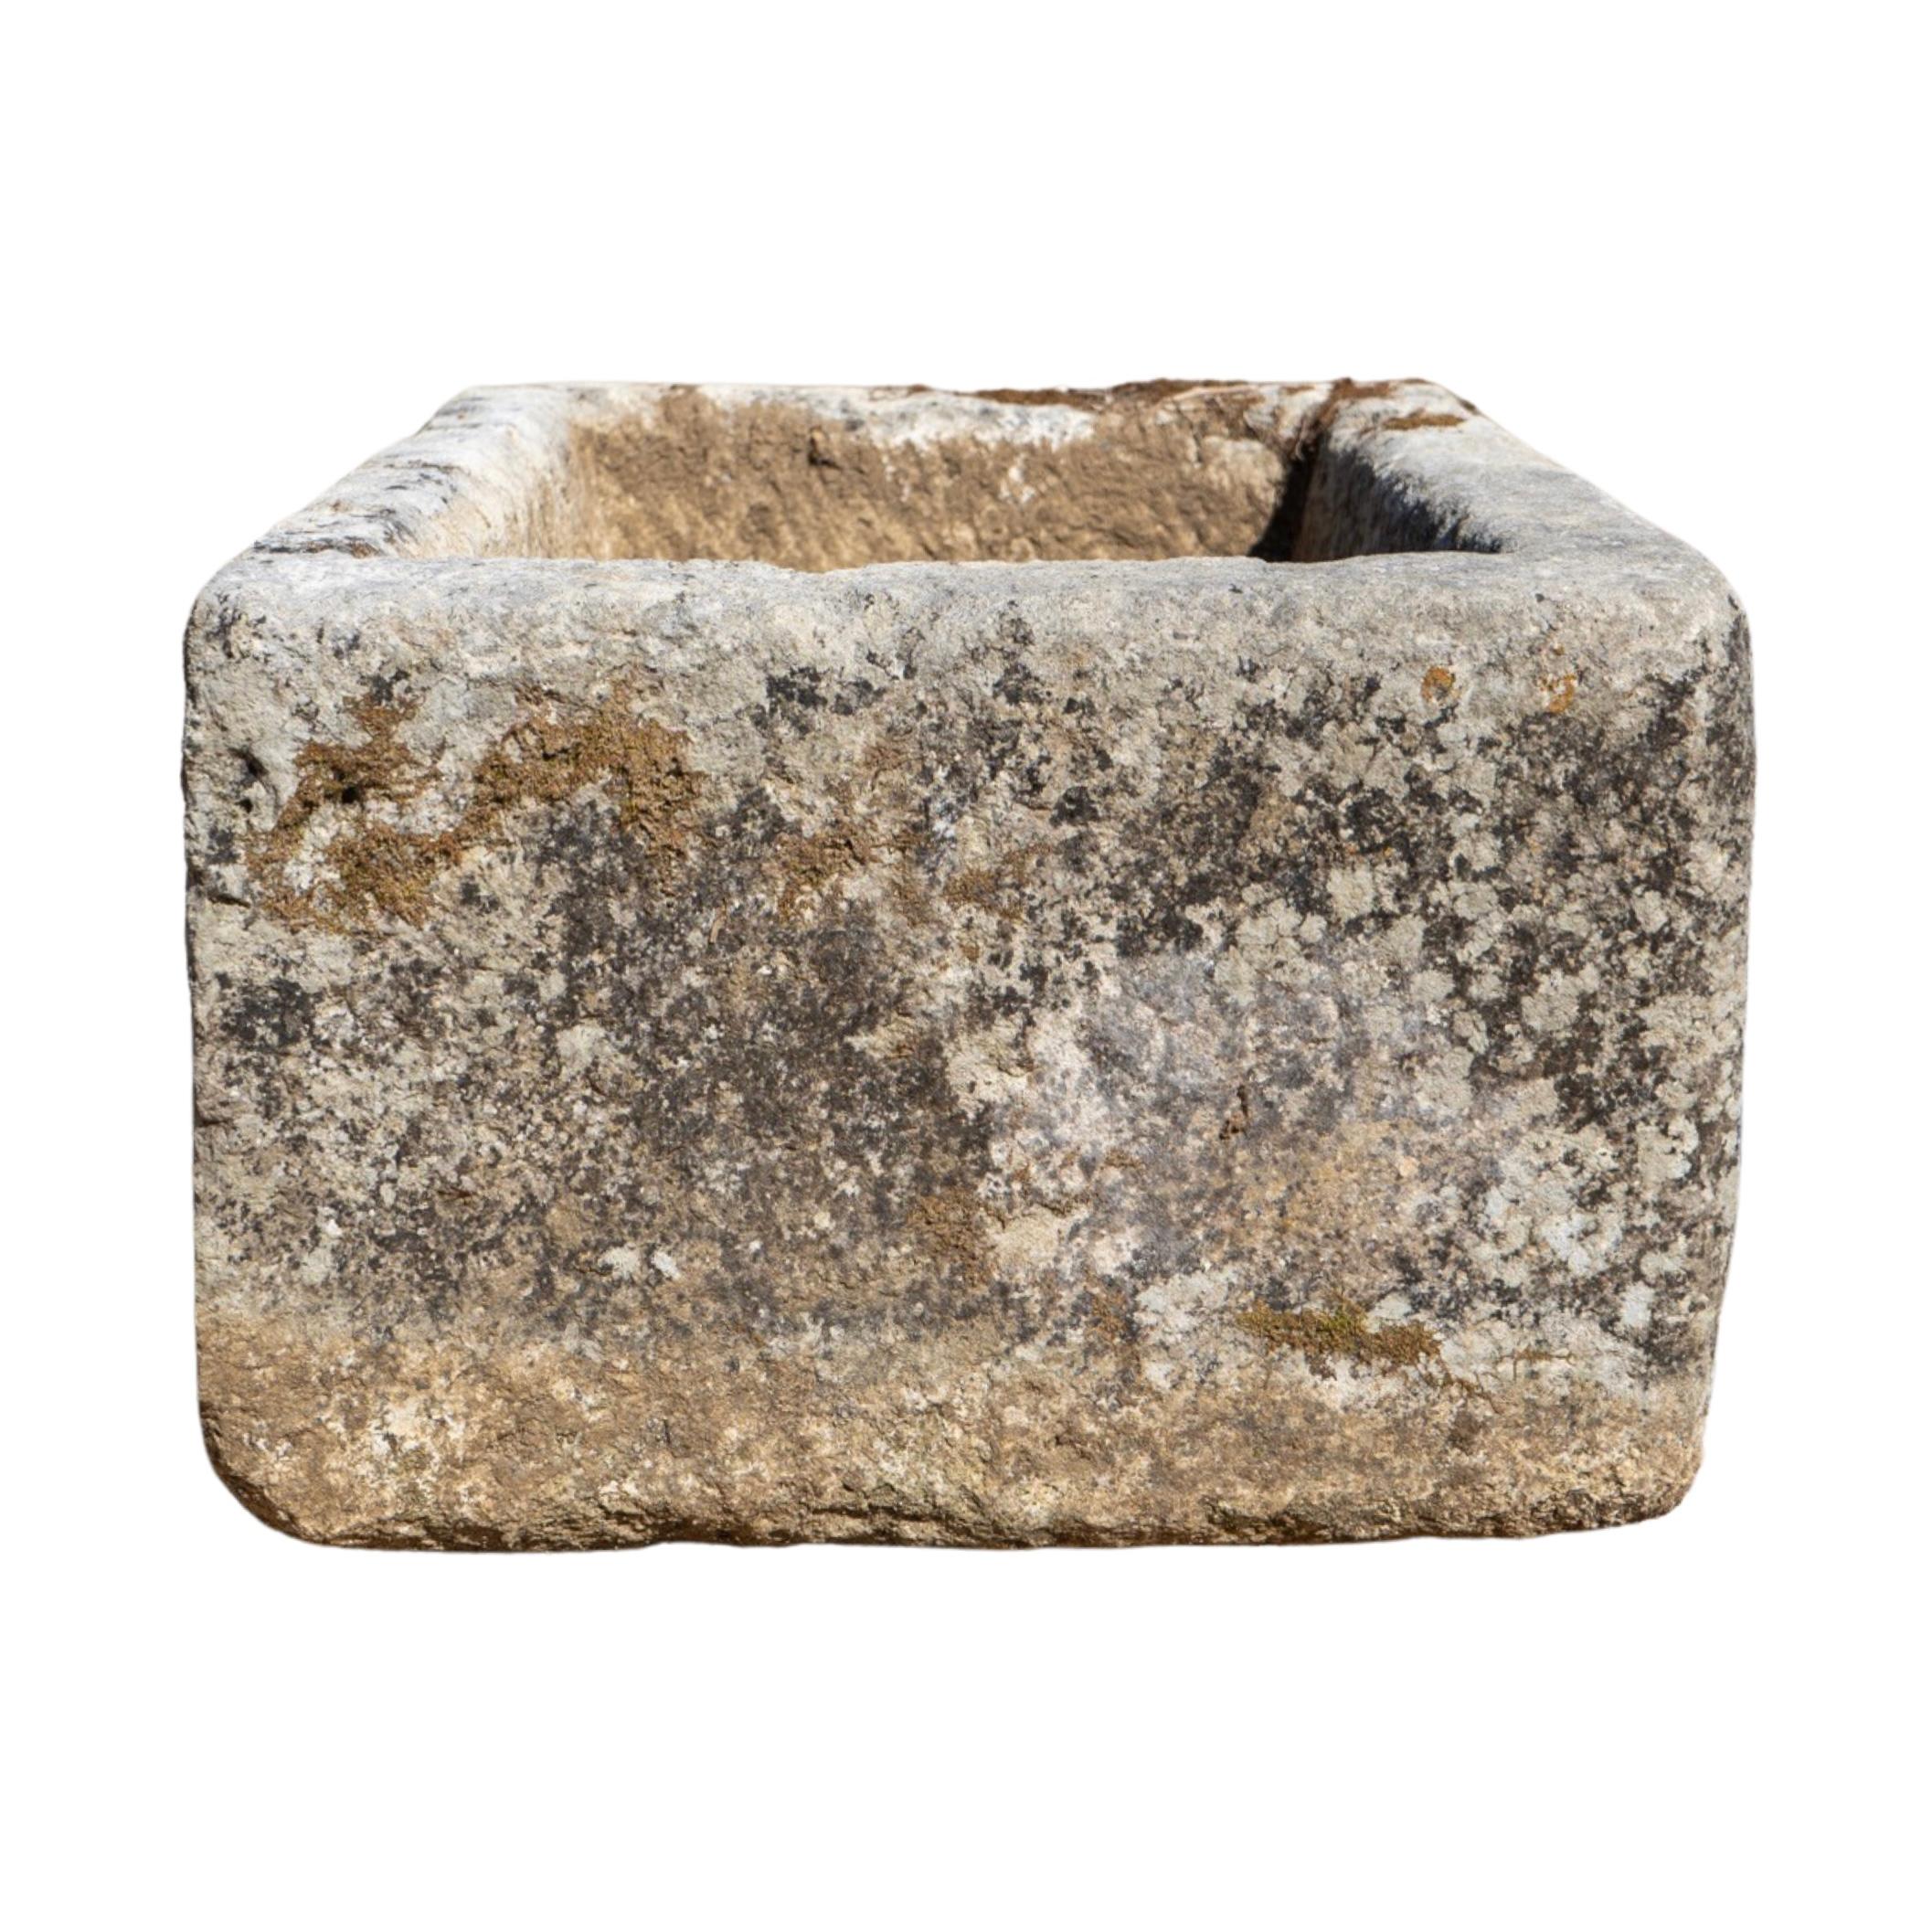 This medium size French limestone trough, crafted in the 1840s, adds a touch of vintage charm to any outdoor space. Its durable construction from premium limestone ensures long-lasting beauty and functionality. Bring a piece of France to your garden